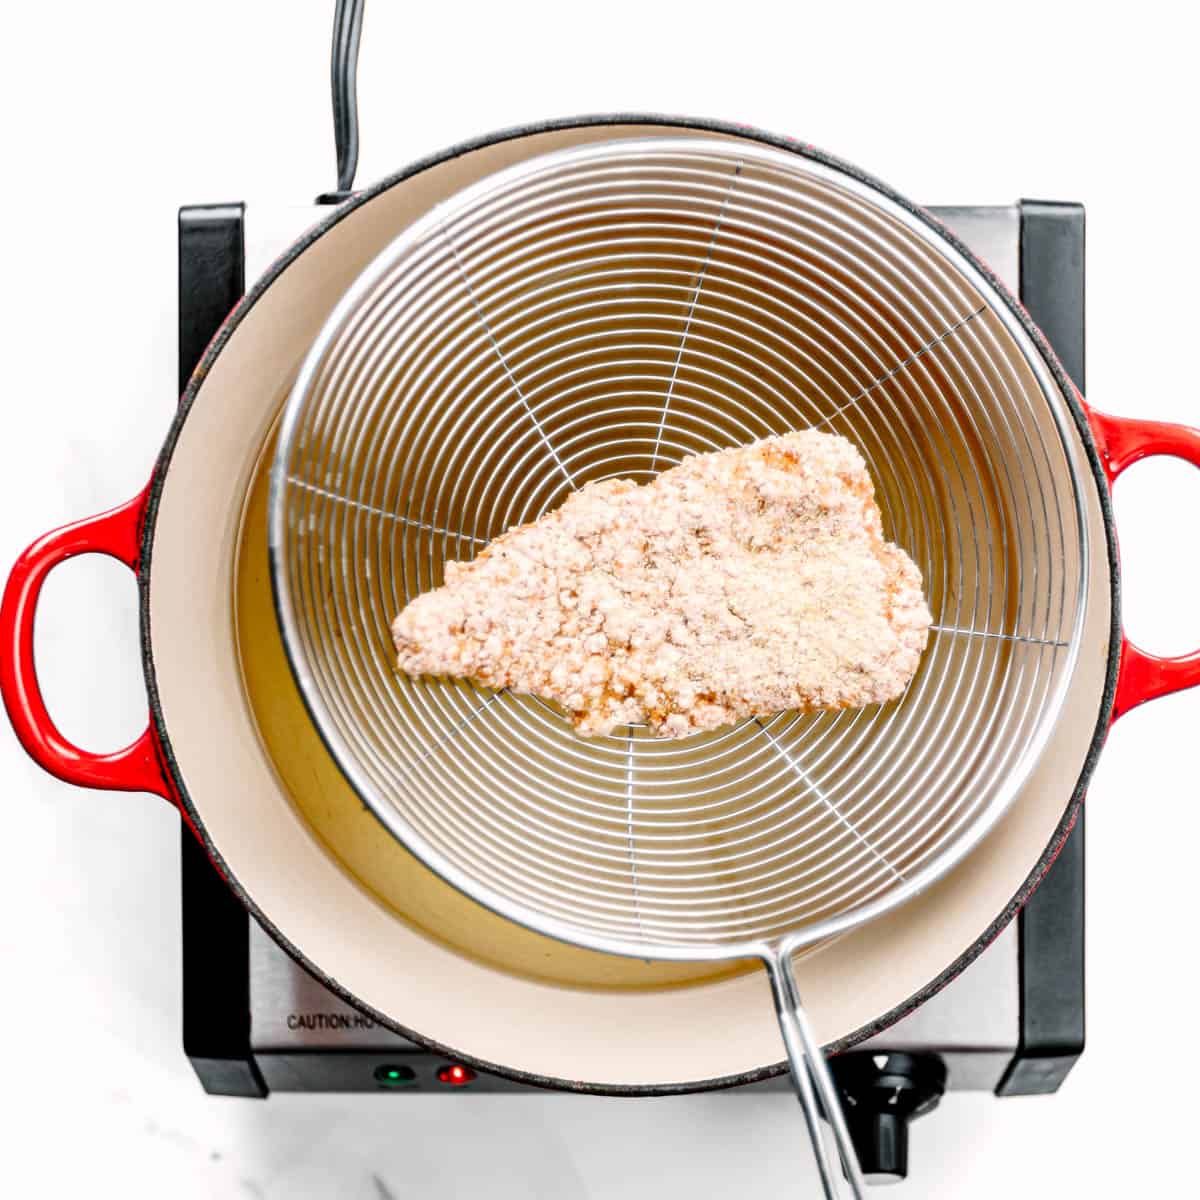 In a large heavy-bottomed pan or pot, heat about 3 inches of oil over moderately high heat to 350°F. 